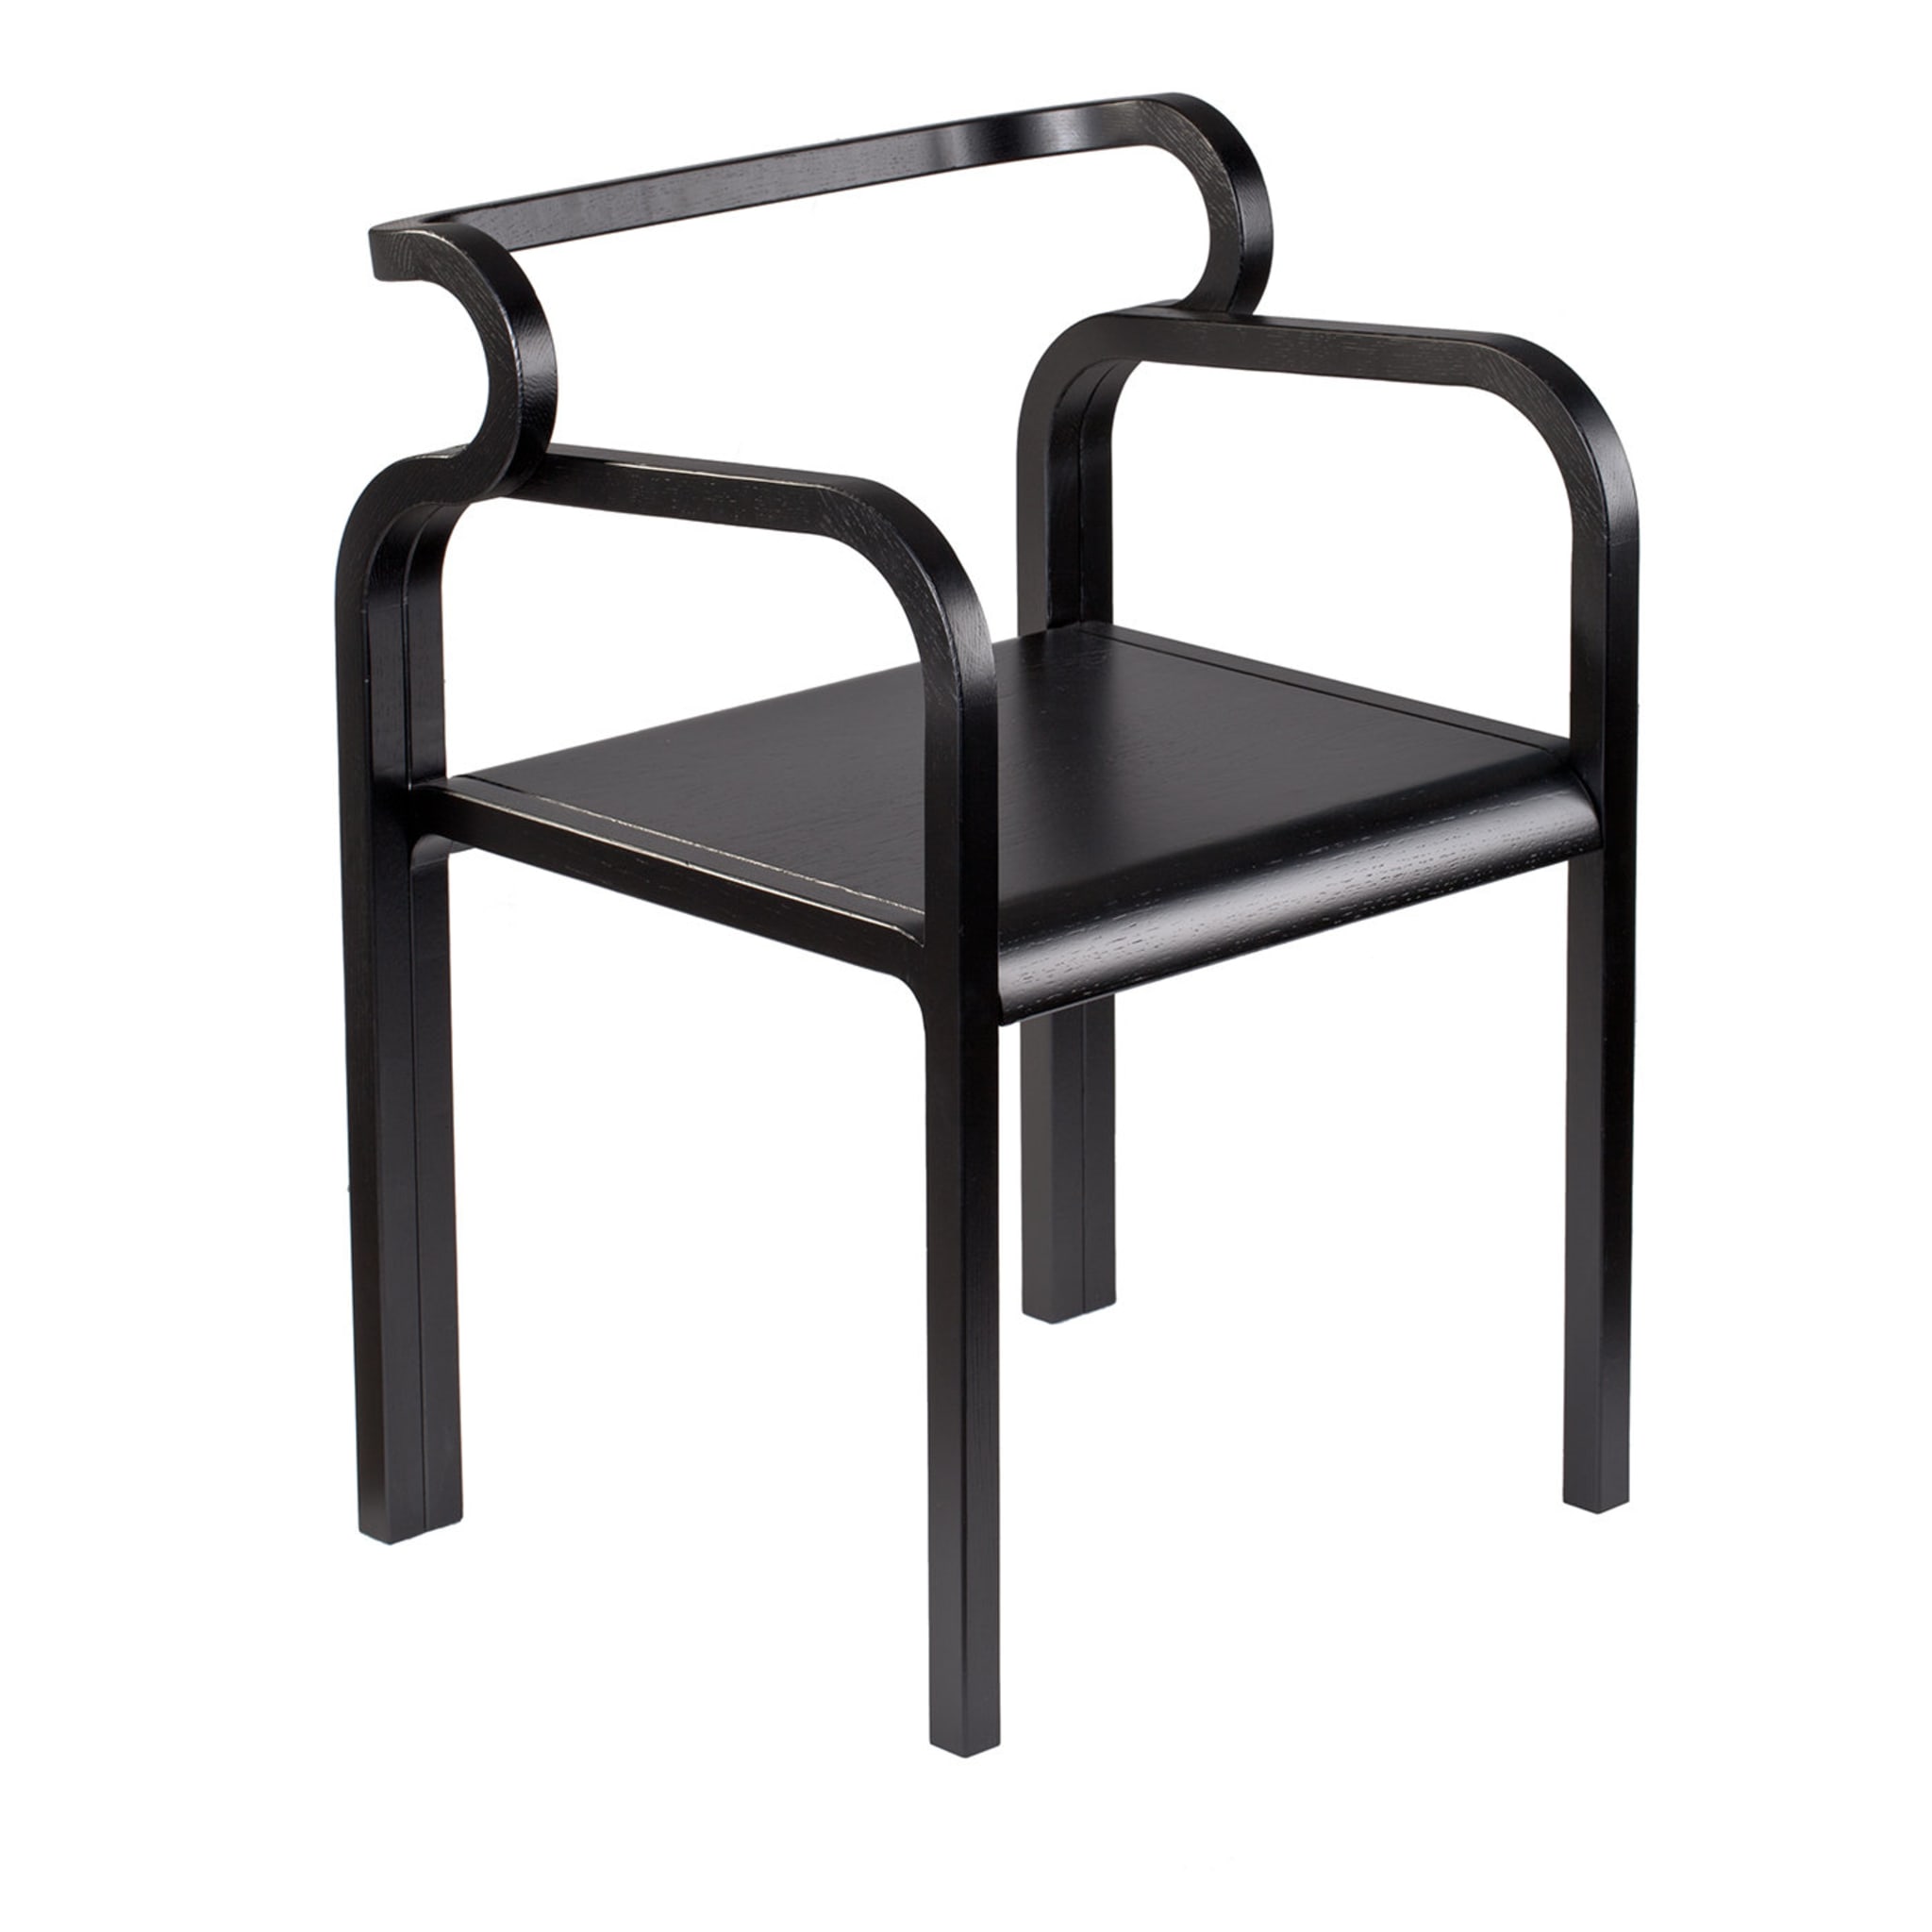 Odette Chair in Black - Main view